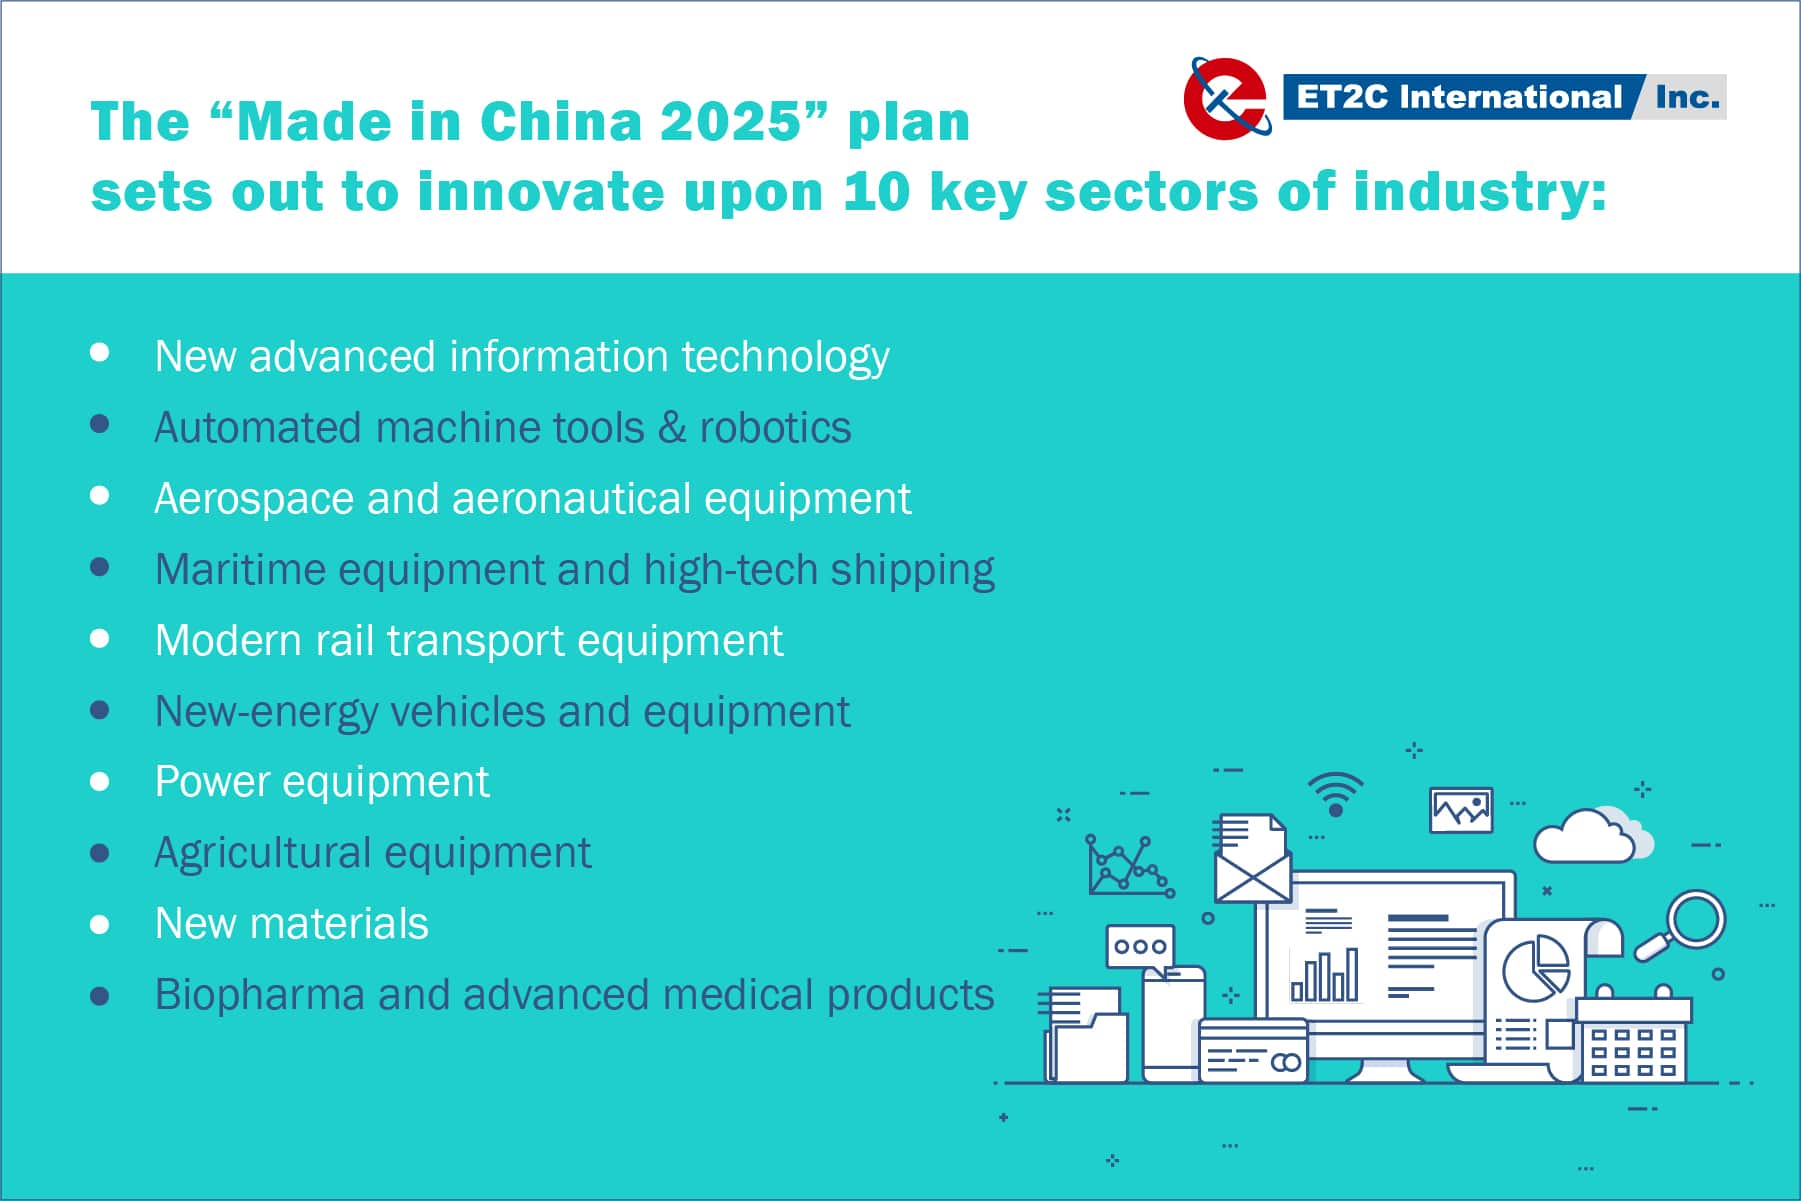 made-in-china-2025-and-chinese-manufacturing-et2c-international